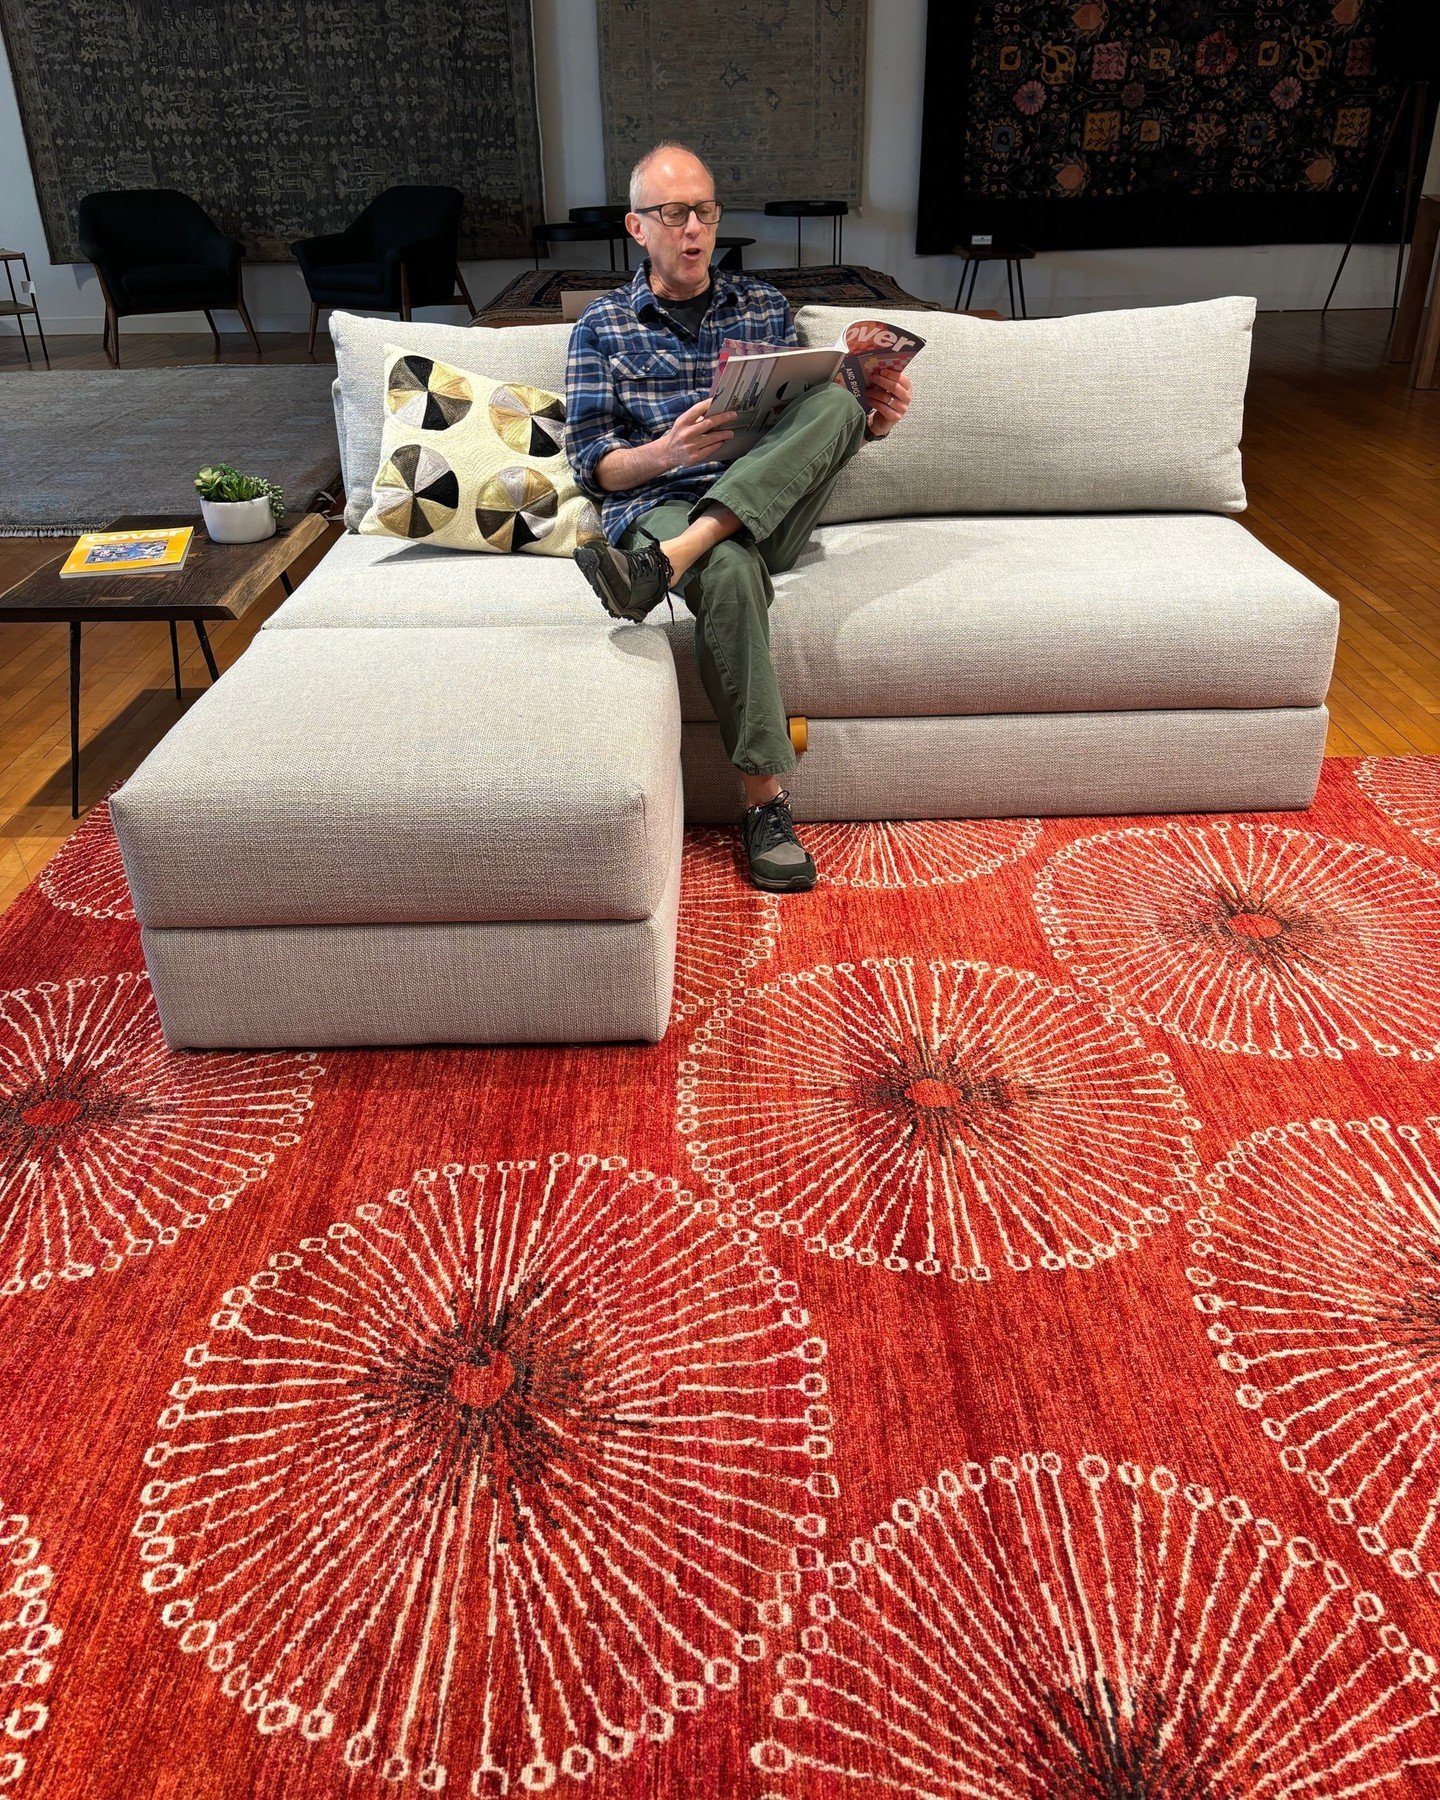 A fun rug with my funny face! This modern hand-knotted 8x10 area rug brings joy to any room. 

Visit us in our State College showroom.⁠ ⁠ ⁠

#shoplocal⁠ #shopsmall #naturalfurniture⁠ ⁠#scandinaviandesign⁠  #nordicliving⁠ #hyggehome #boalsburgpa #boal